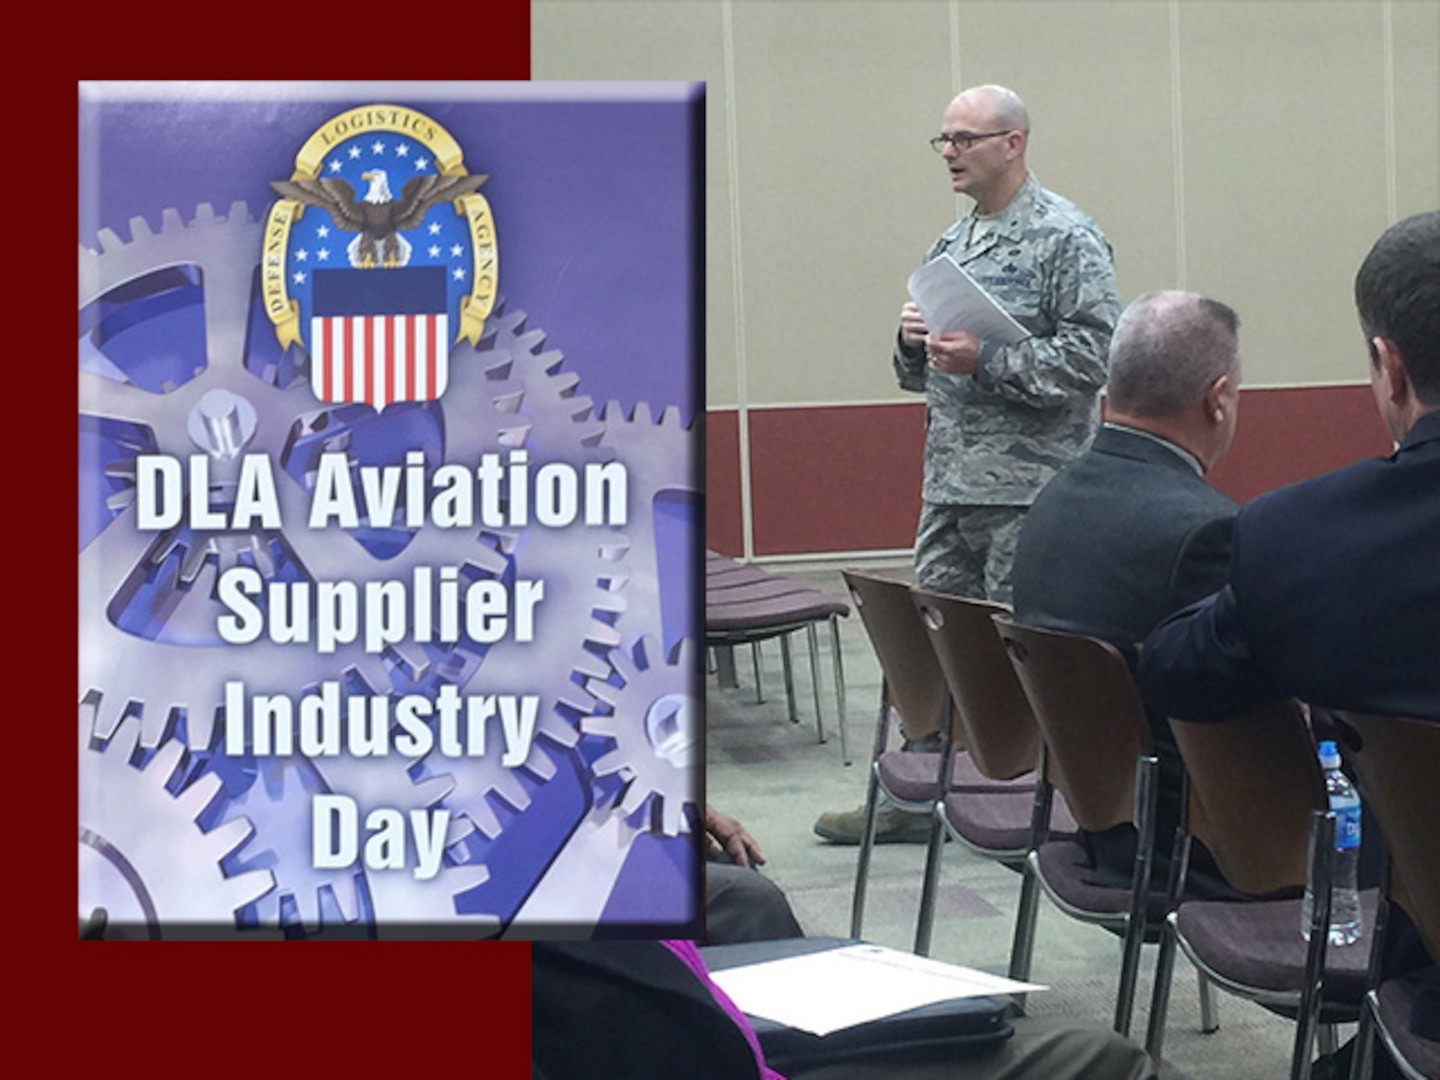 Defense Logistics Agency Aviation's Commander Air Force Brig. Gen. Allan Day hosts Supplier Industry Day Oct. 27, 2015 at the Frank B. Lotts Conference Center in Richmond, Virginia. DLA senior leaders and industry supply partners attended the event to share ideas on how to do better business with DLA Aviation. 